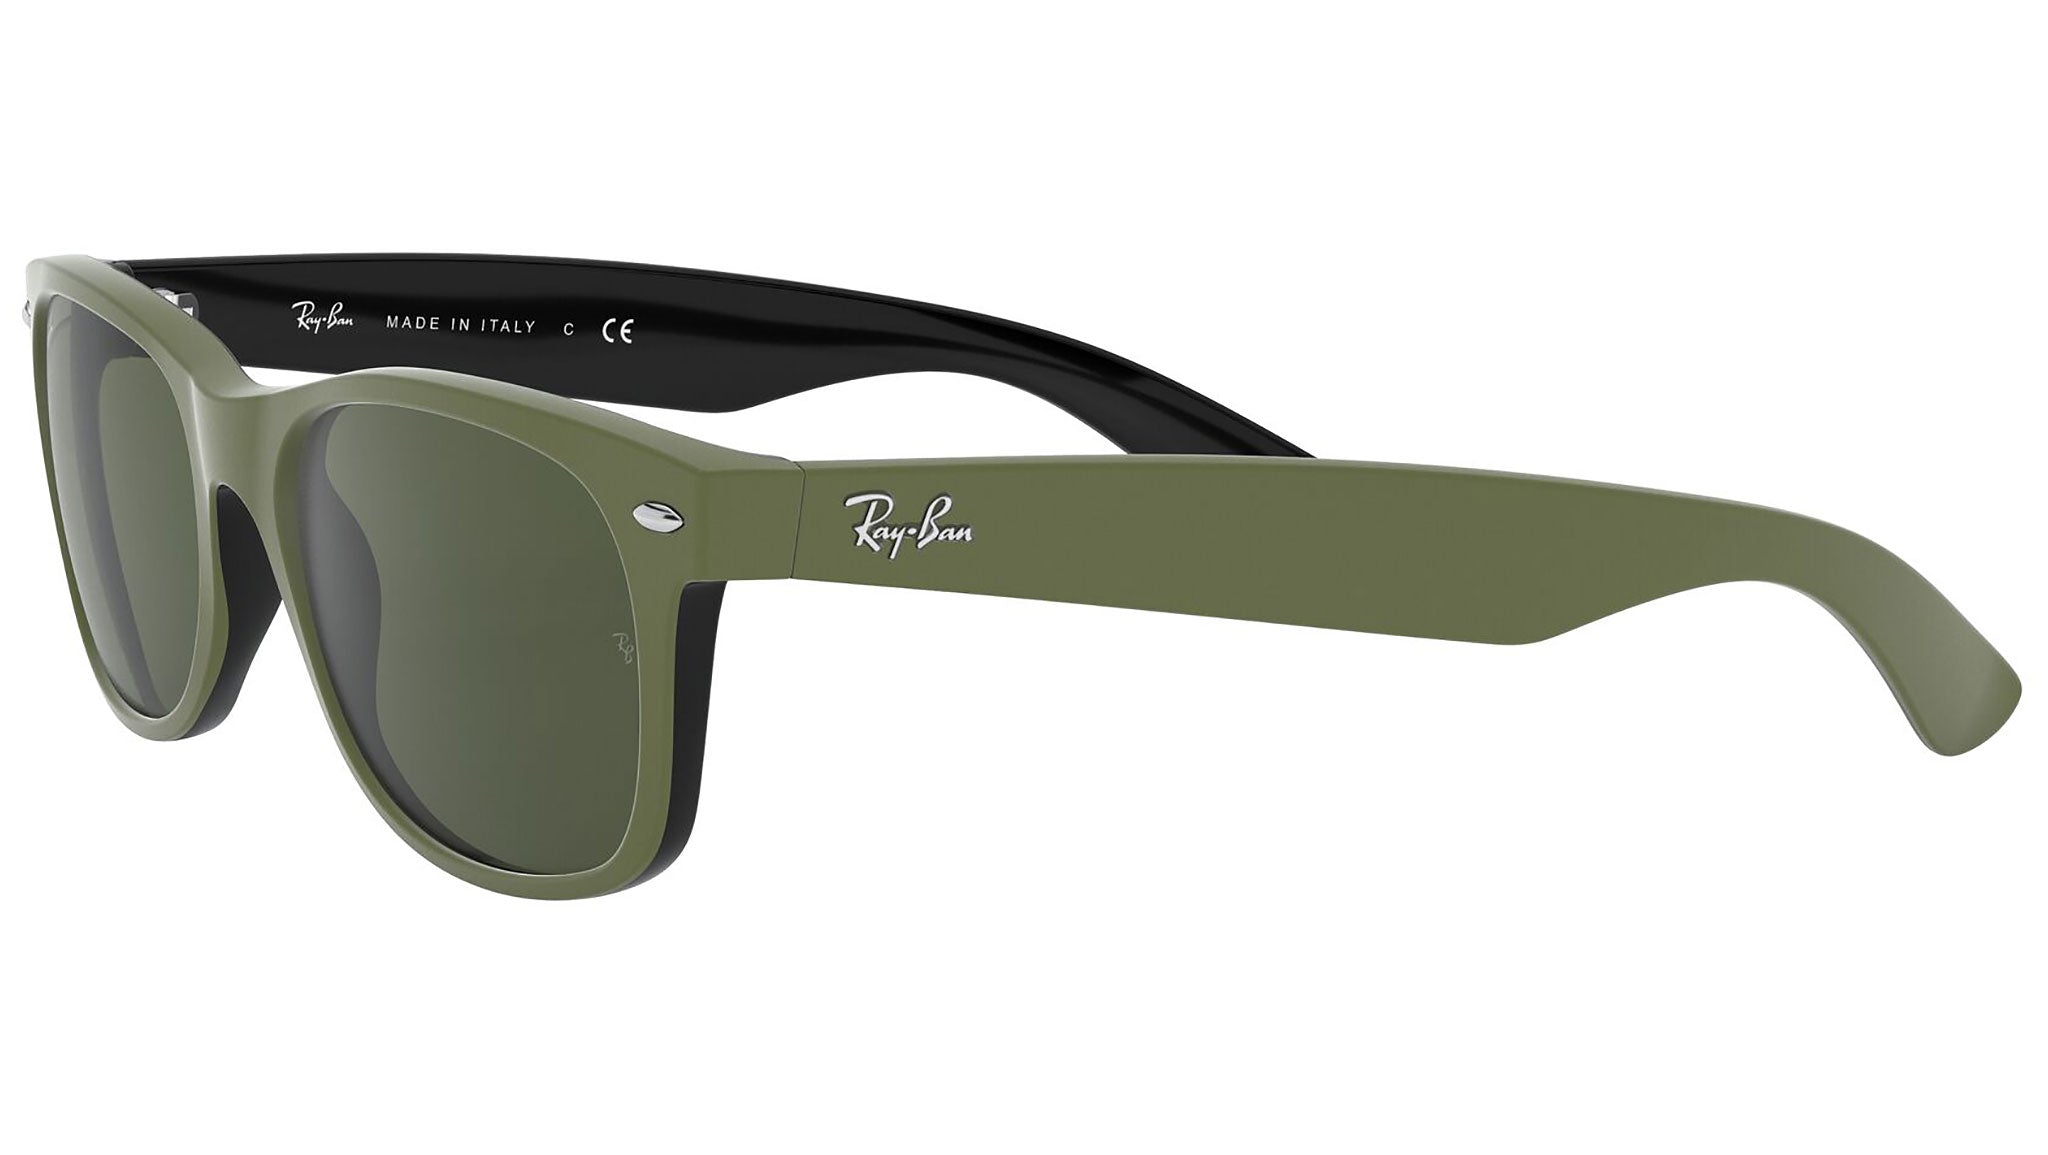 New Wayfarer Color Mix RB2132 rubber military green